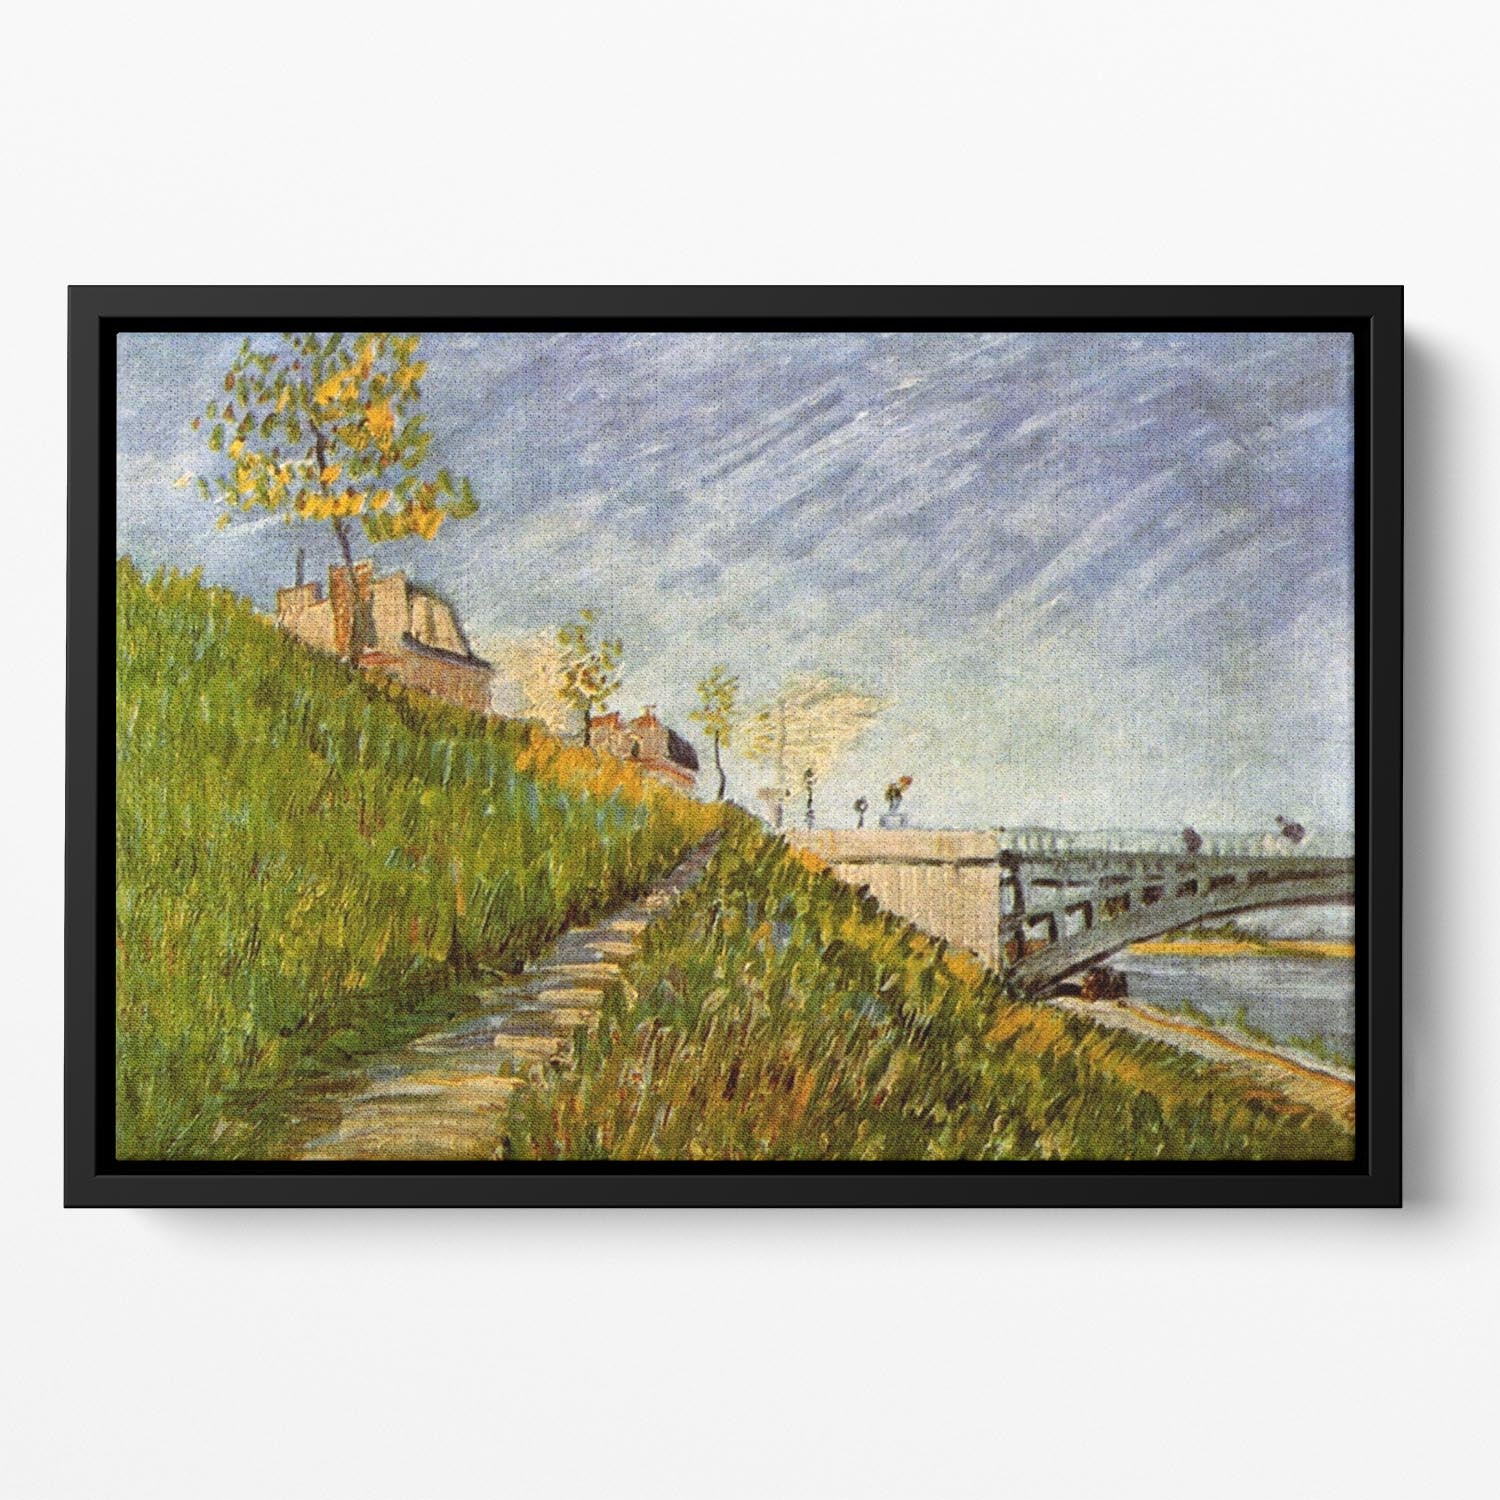 Banks of the Seine with Pont de Clichy by Van Gogh Floating Framed Canvas